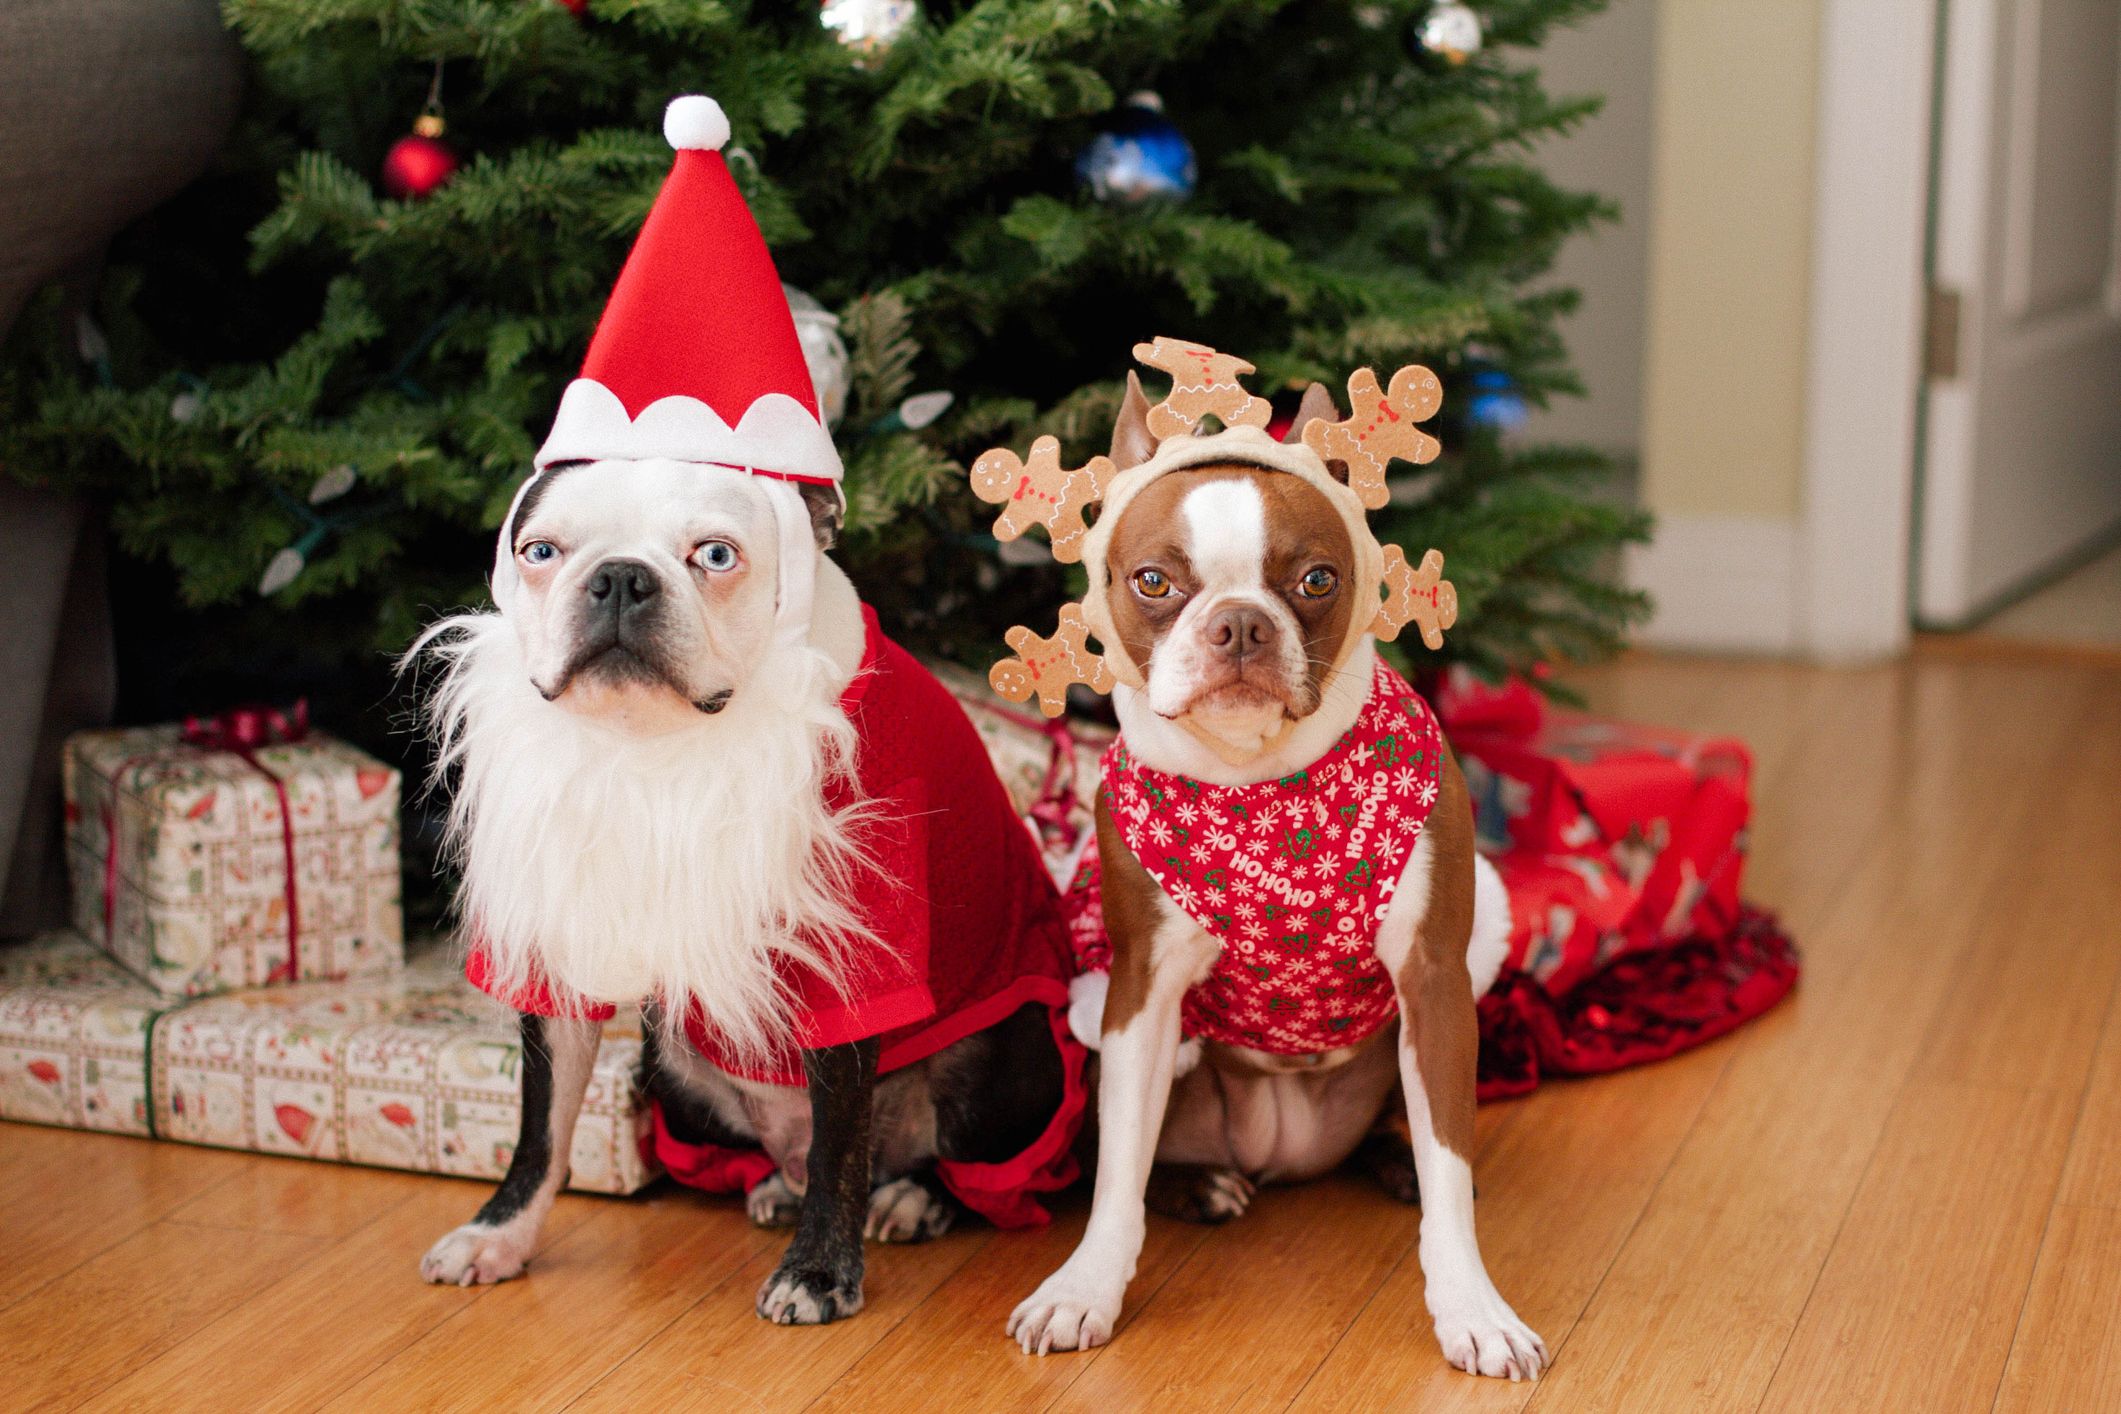 Puppies presented as holiday gifts are not always the best idea